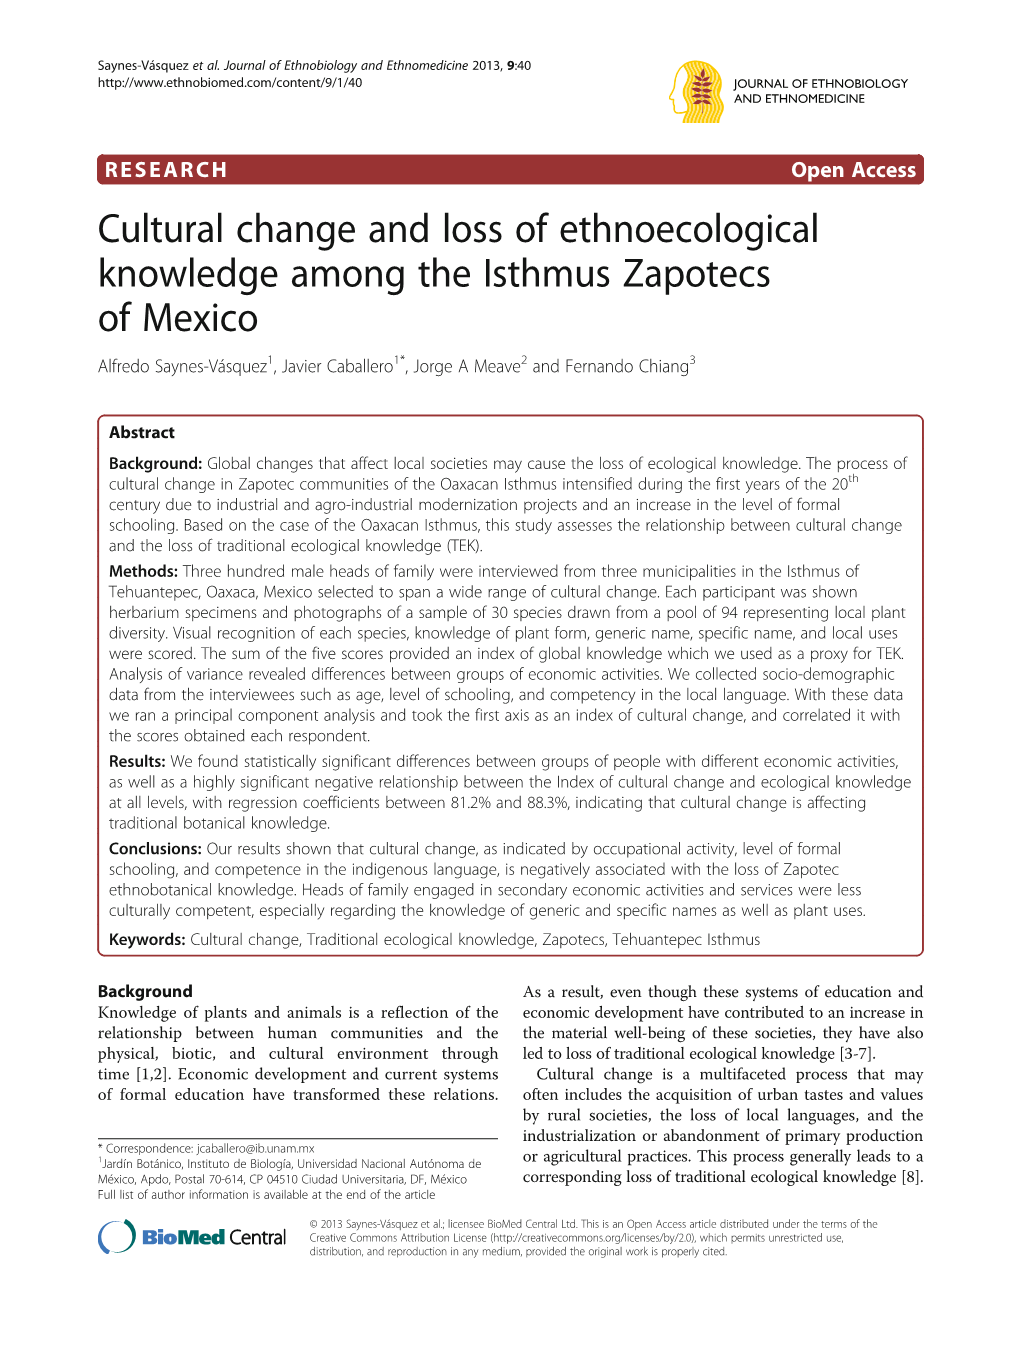 Cultural Change and Loss of Ethnoecological Knowledge Among